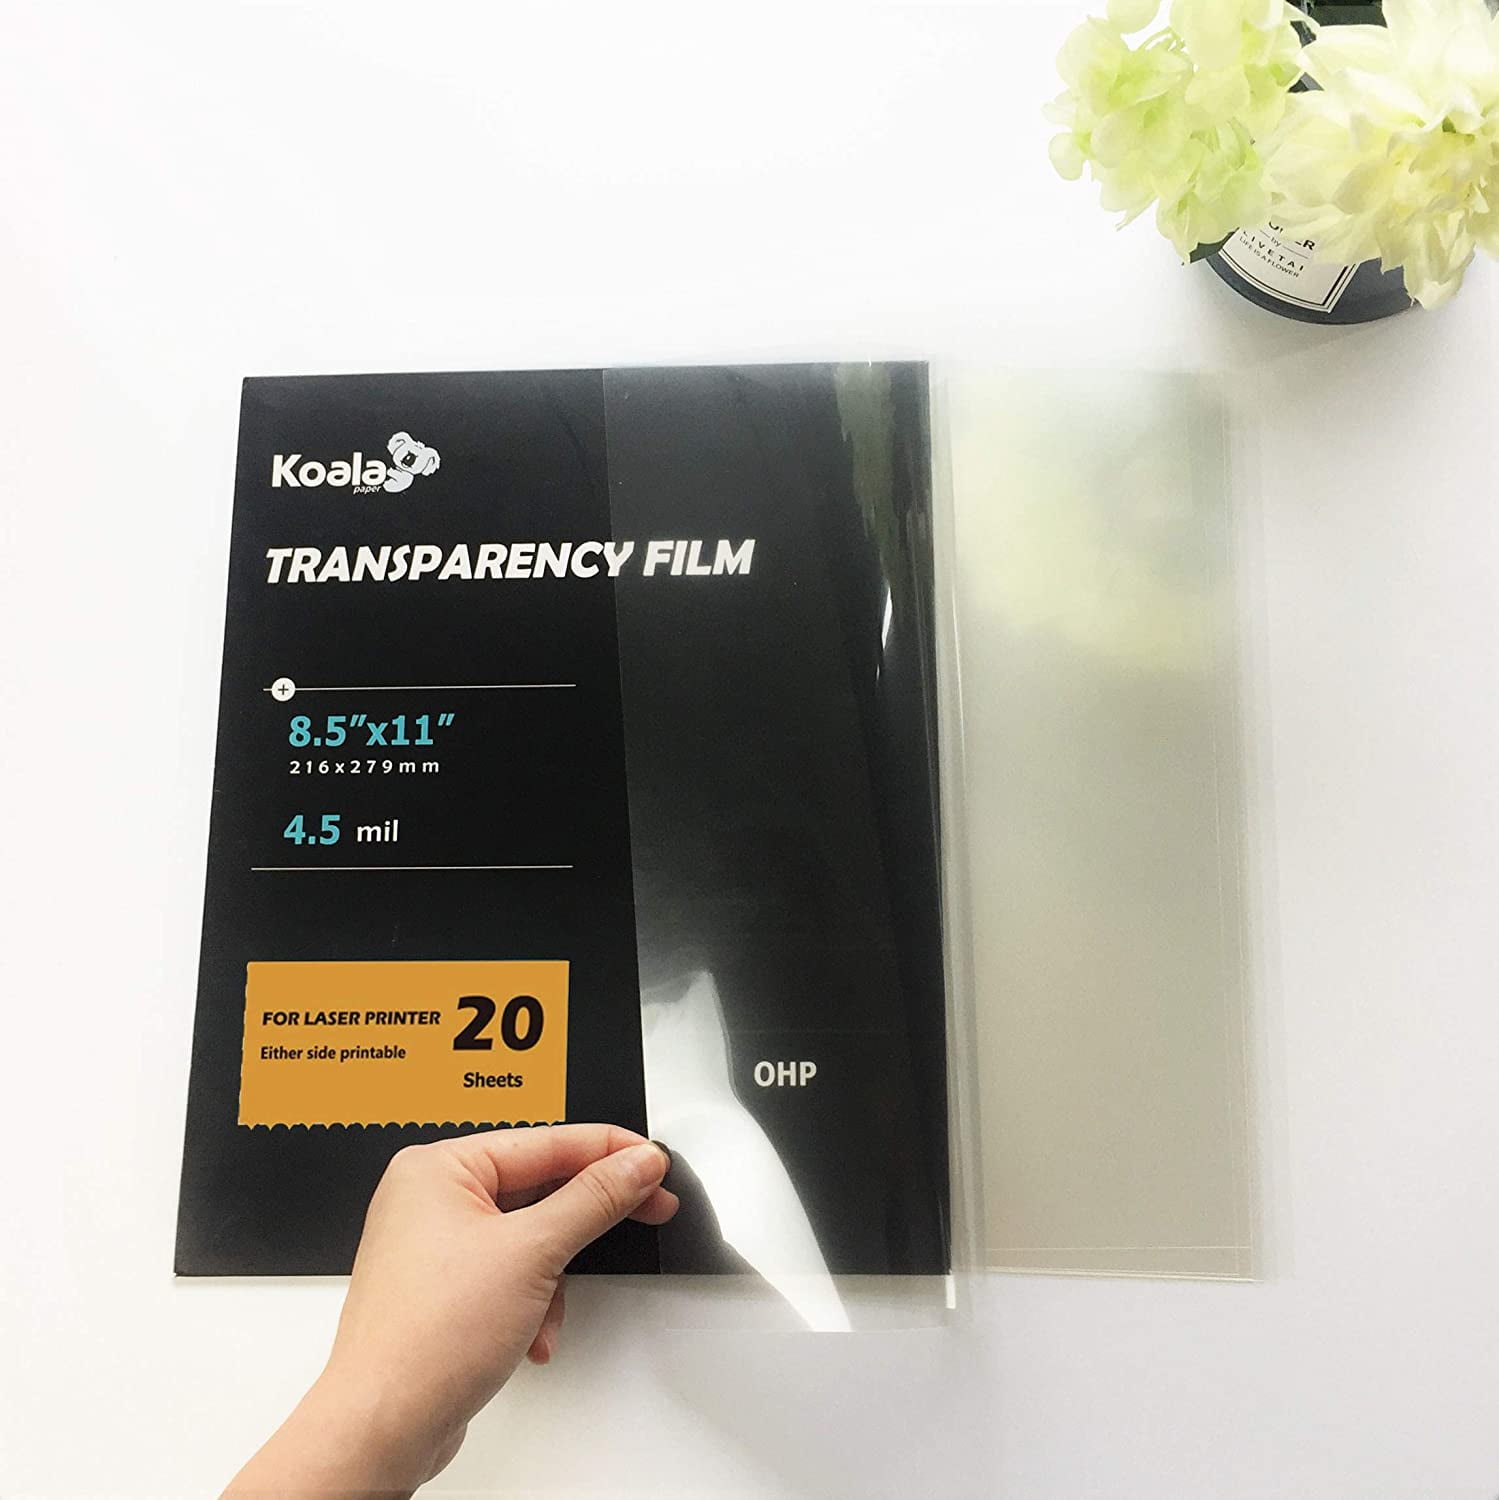 KOALA Transparency Film for Inkjet/Laser Jet Printers - 8.5 x 11 Inch 20  Sheets Printable Transparency Paper for OHP Film Overhead Projector Film or  Craft Projects 